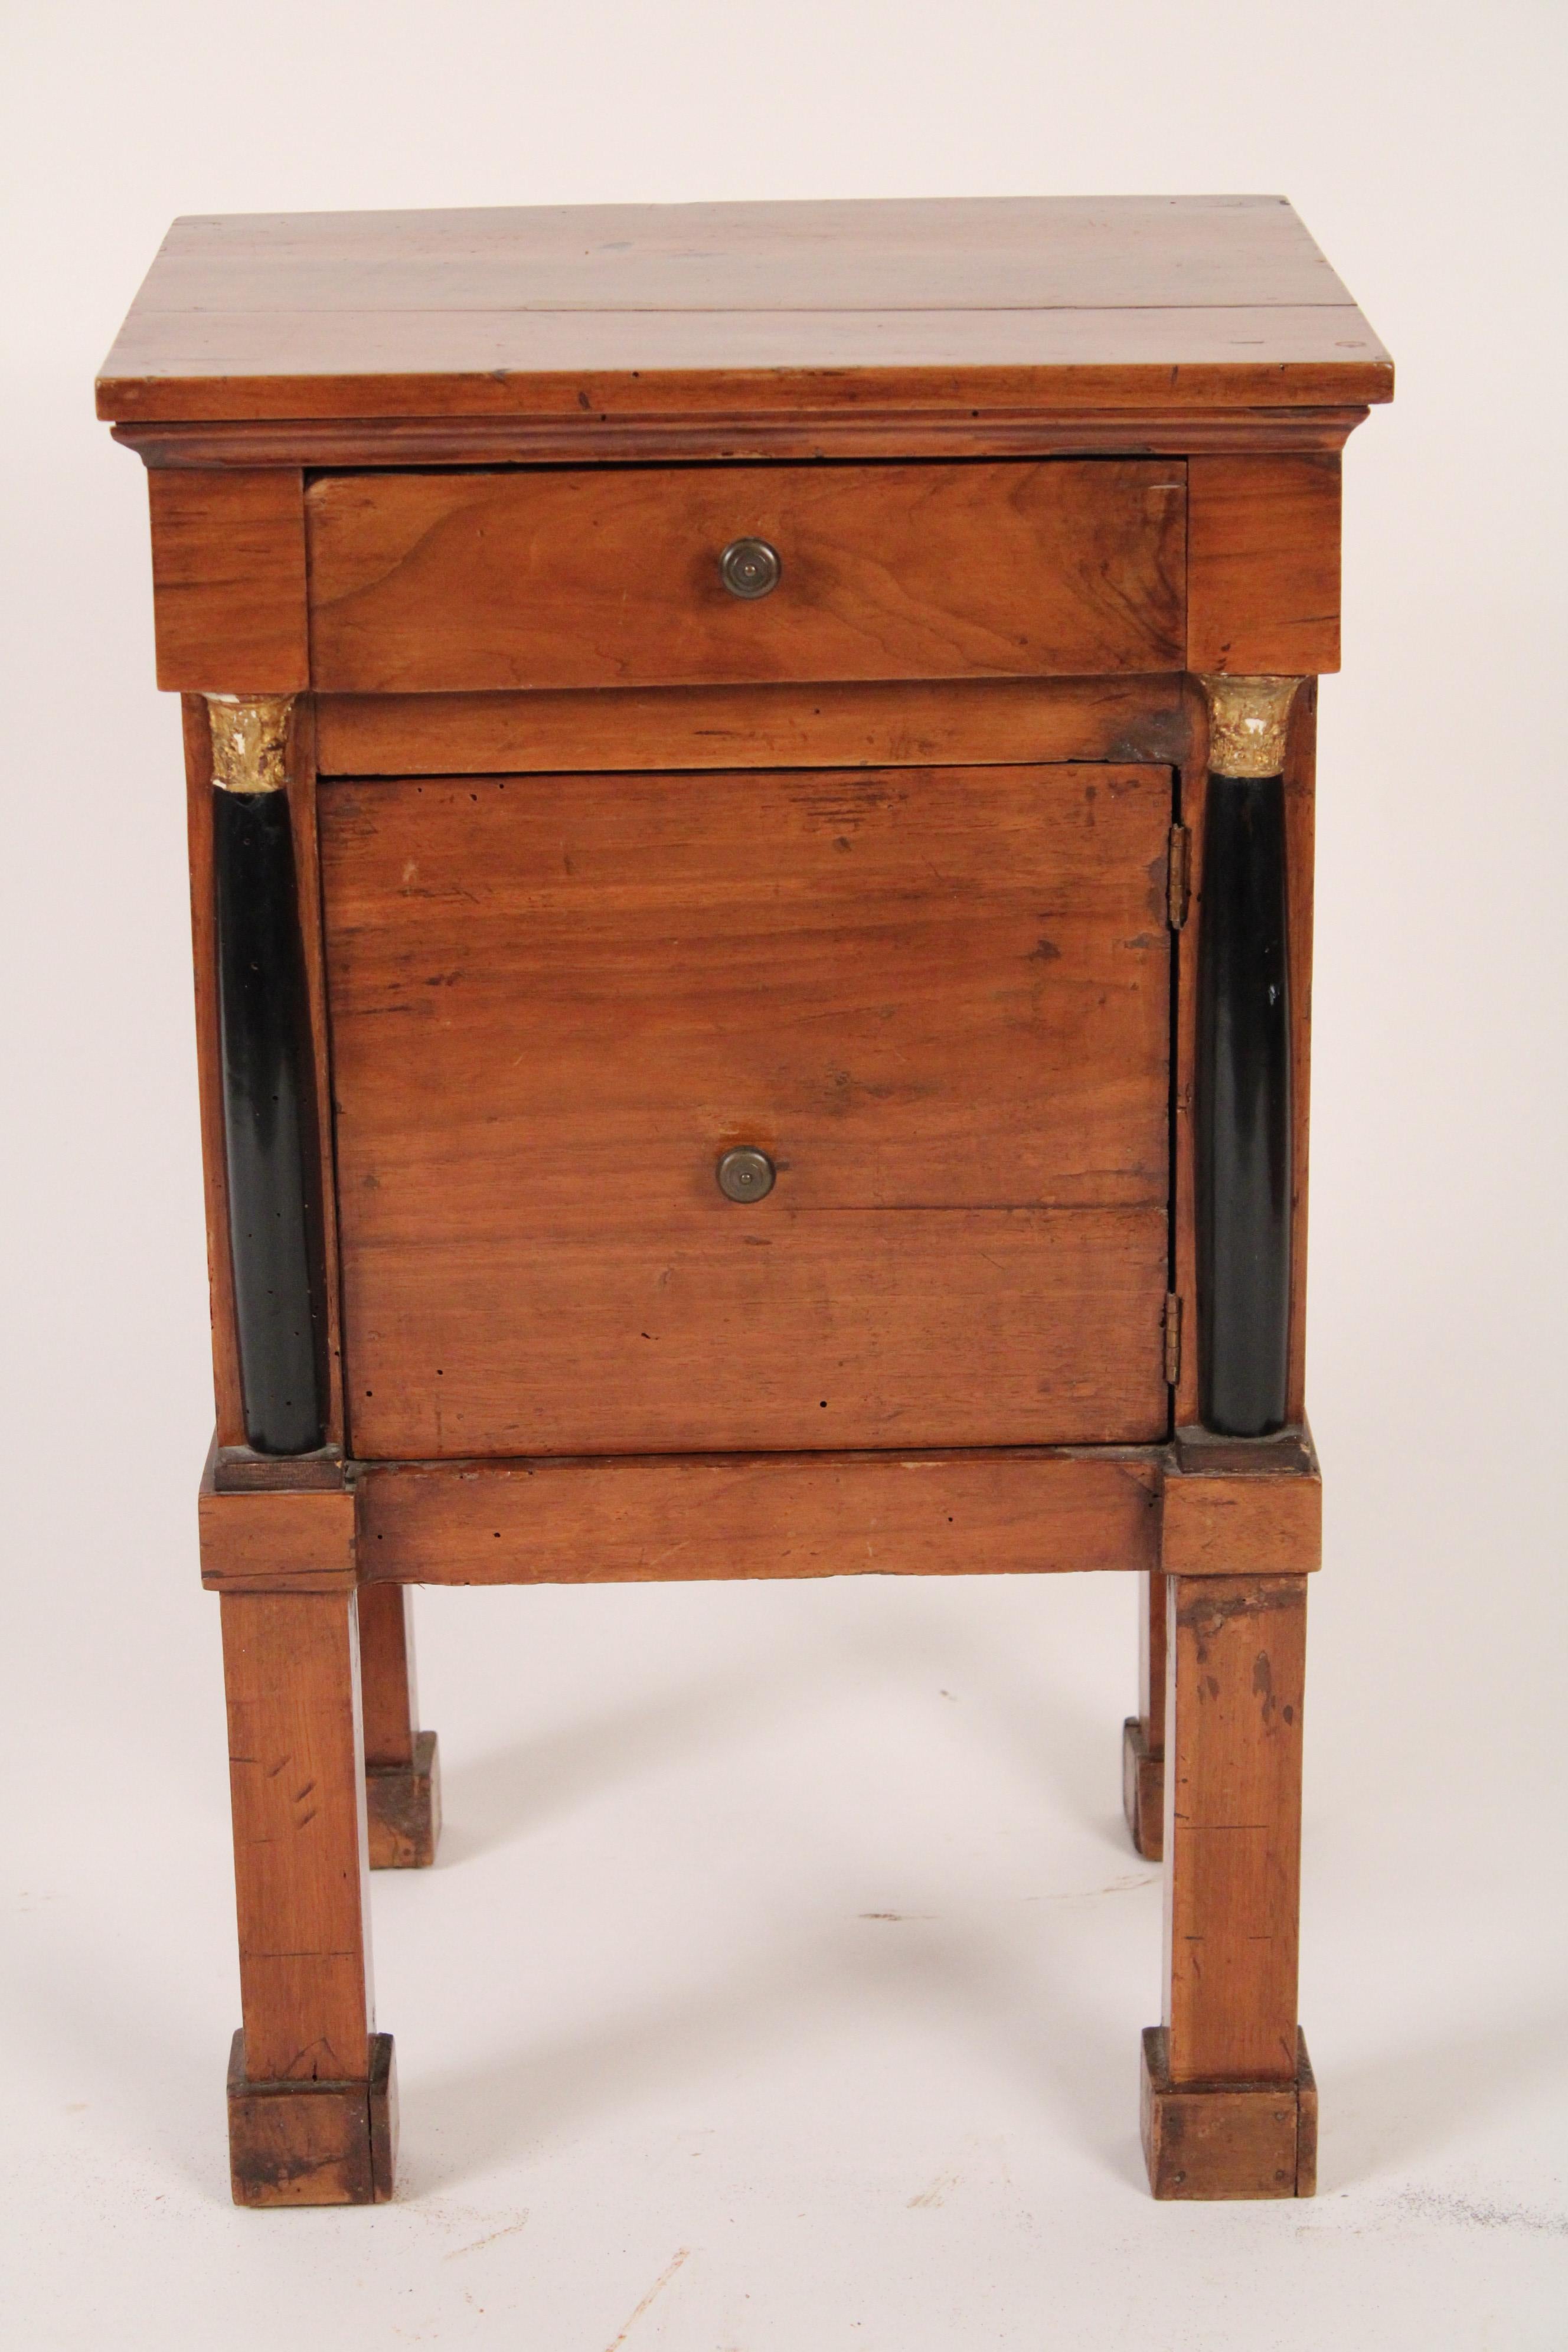 Italian Empire style fruit wood comodini, circa 1900. With a square top, a drawer and a door, black lacquered columns with gilt capitals on square legs and feet.